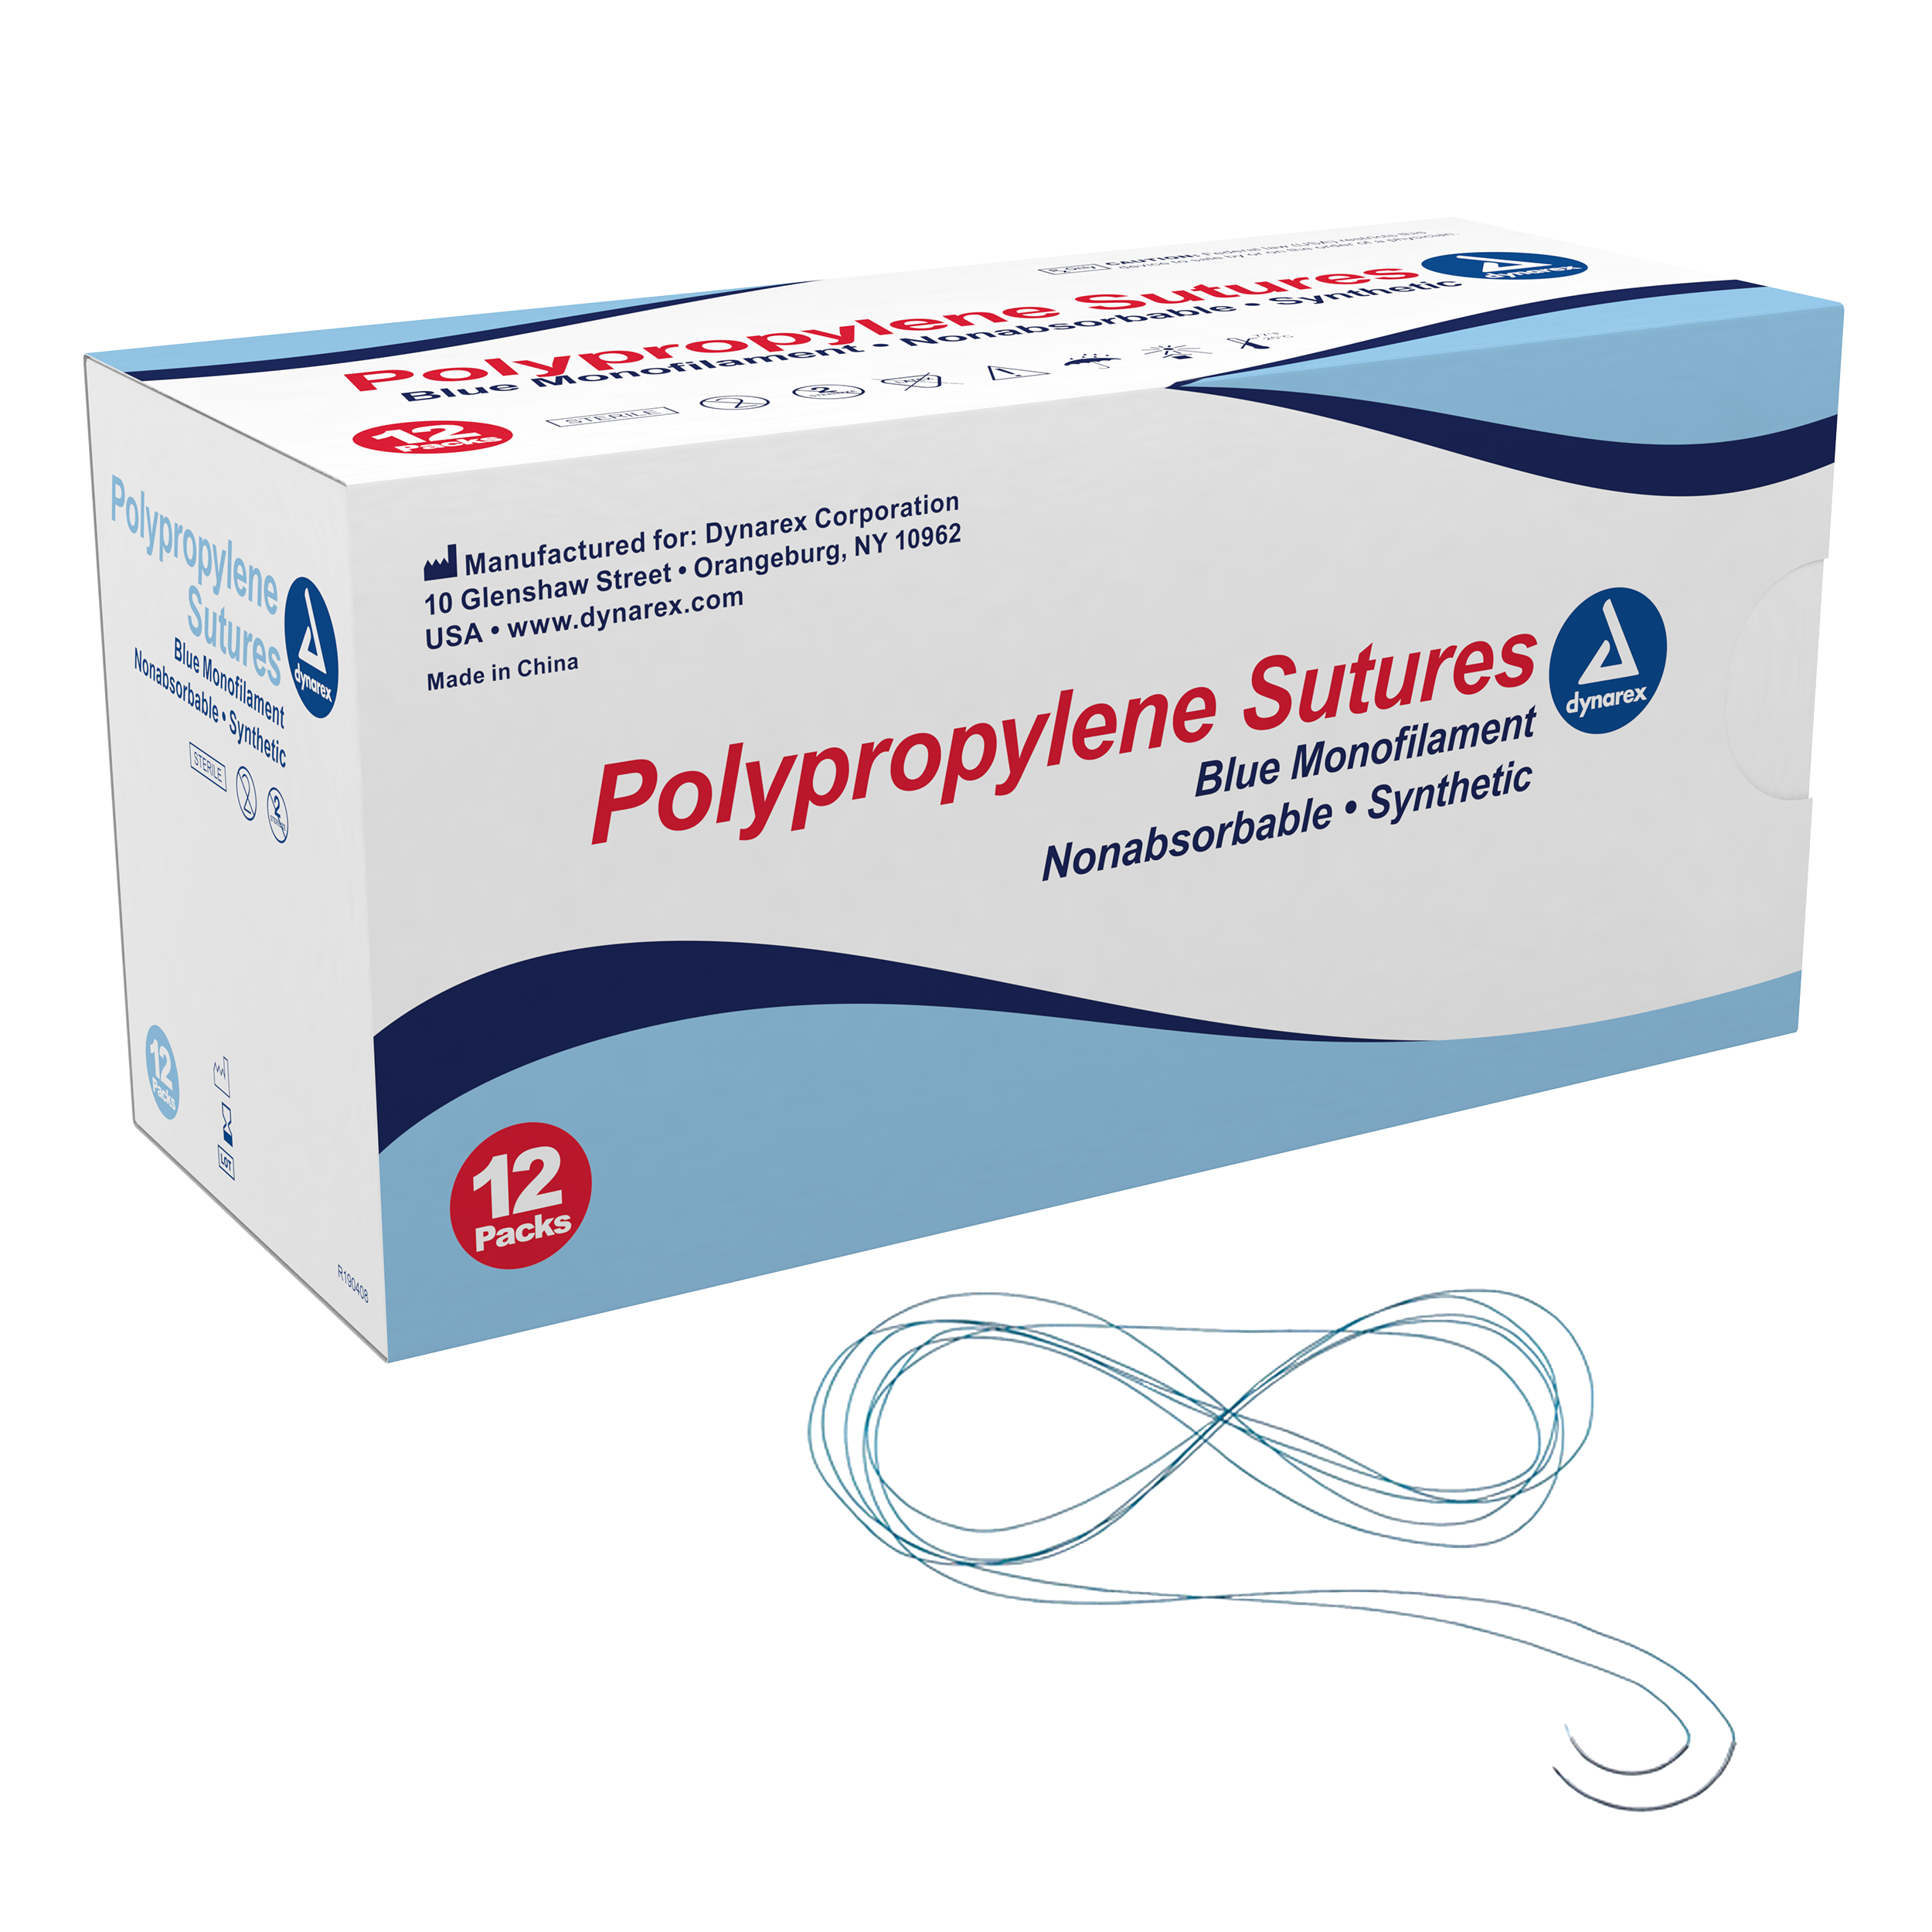 Polypropylene Sutures-Non Absorbable-Synthetic Blue, 5-0,C3 Needle - 18in